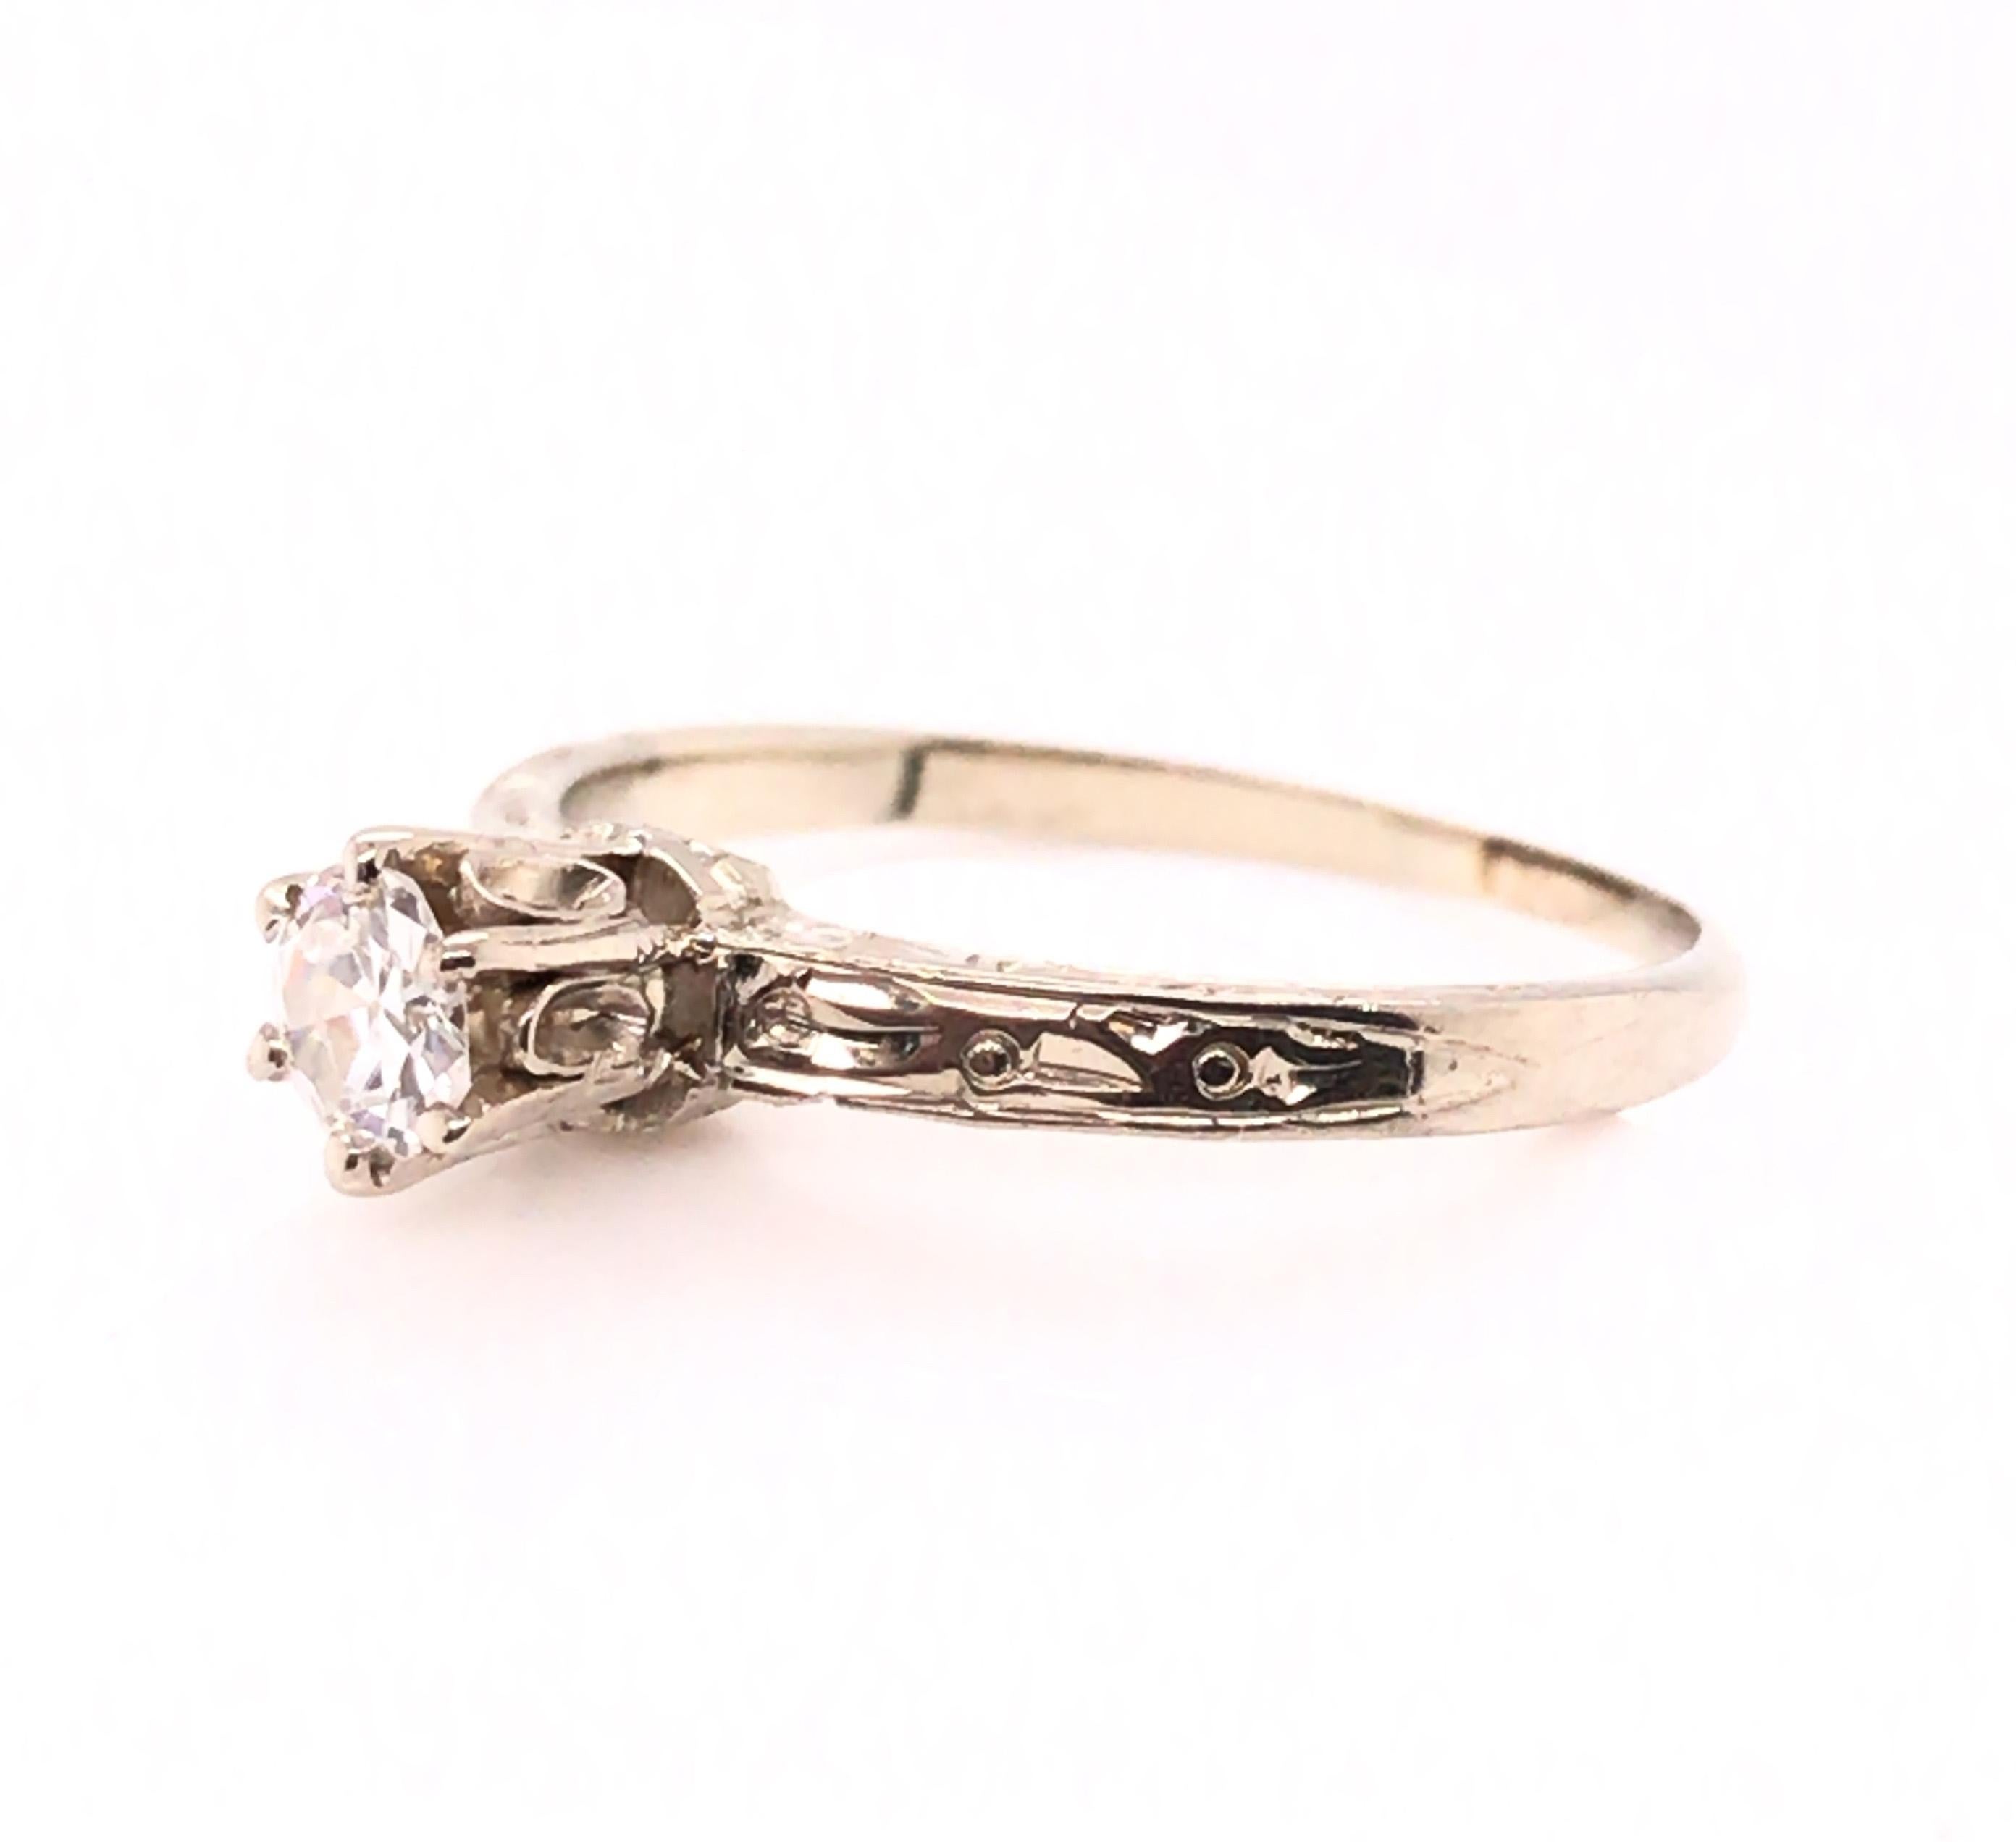 Edwardian Diamond Engagement Ring .20ct Single Cut Original 1910's Antique 14K In Good Condition For Sale In Dearborn, MI